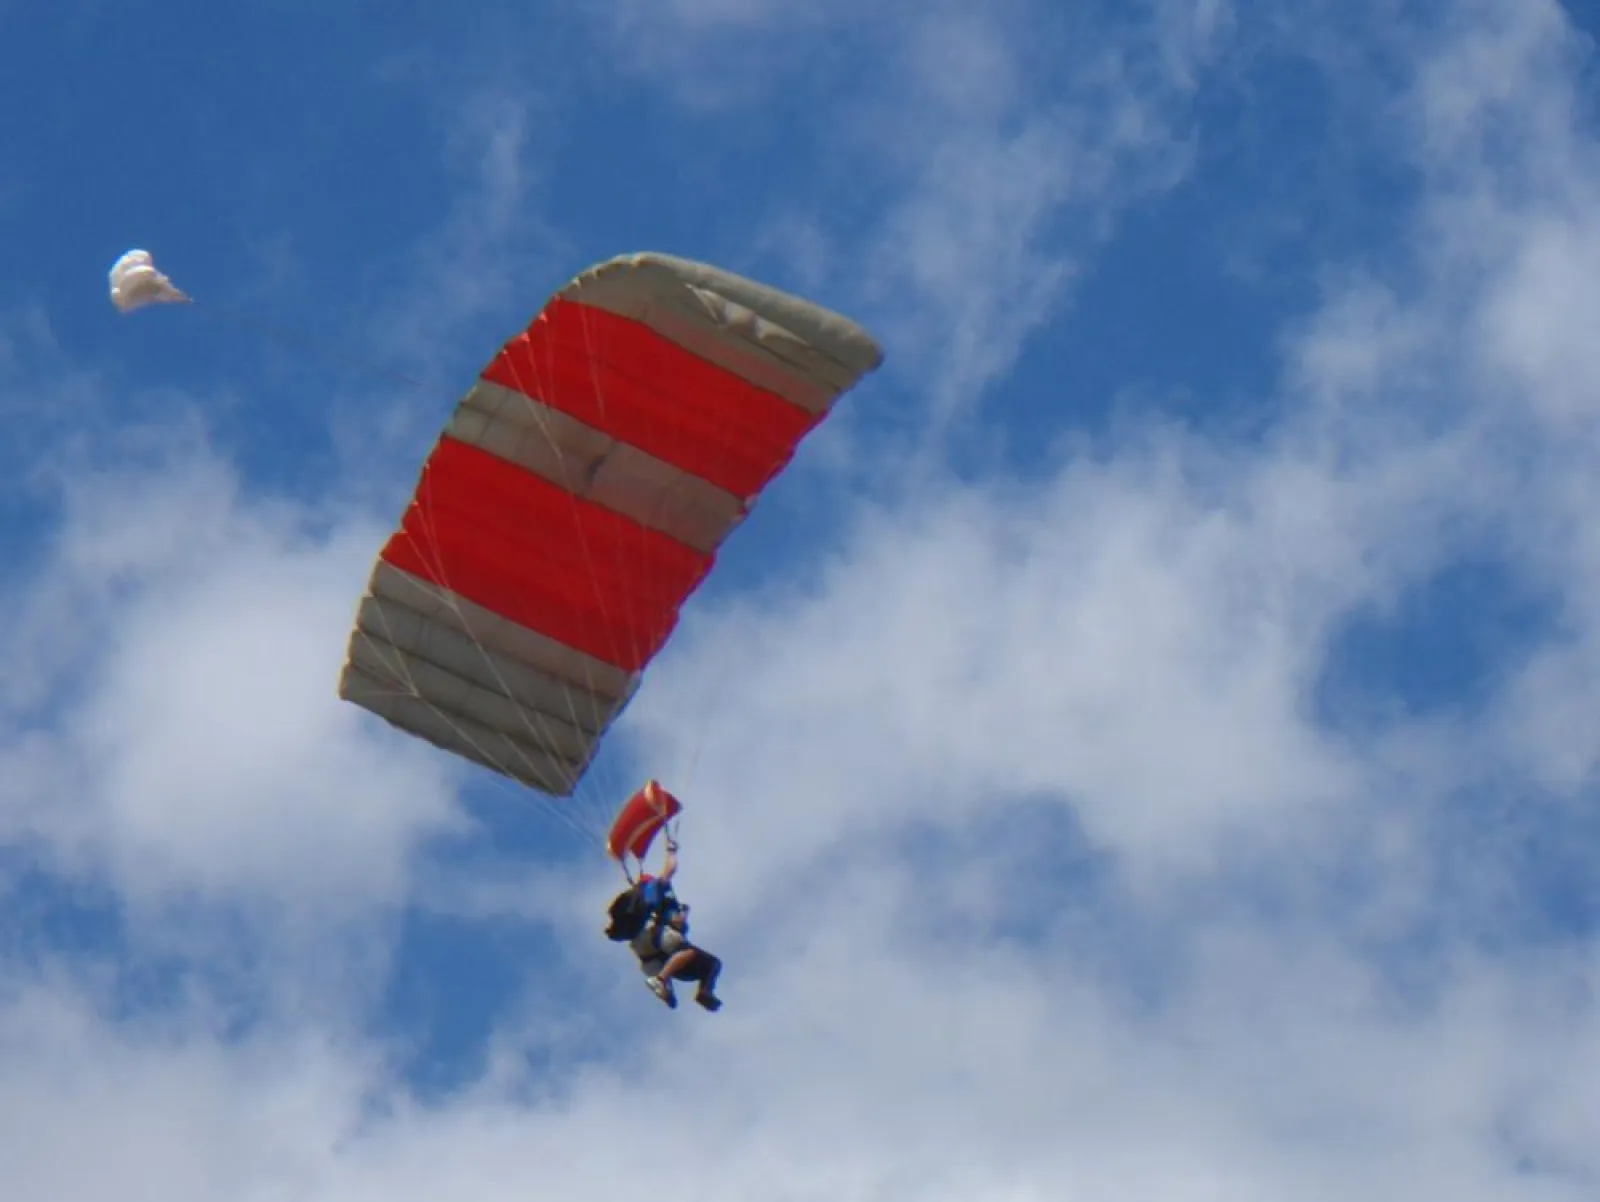 a parachute is flying through the air on a cloudy day